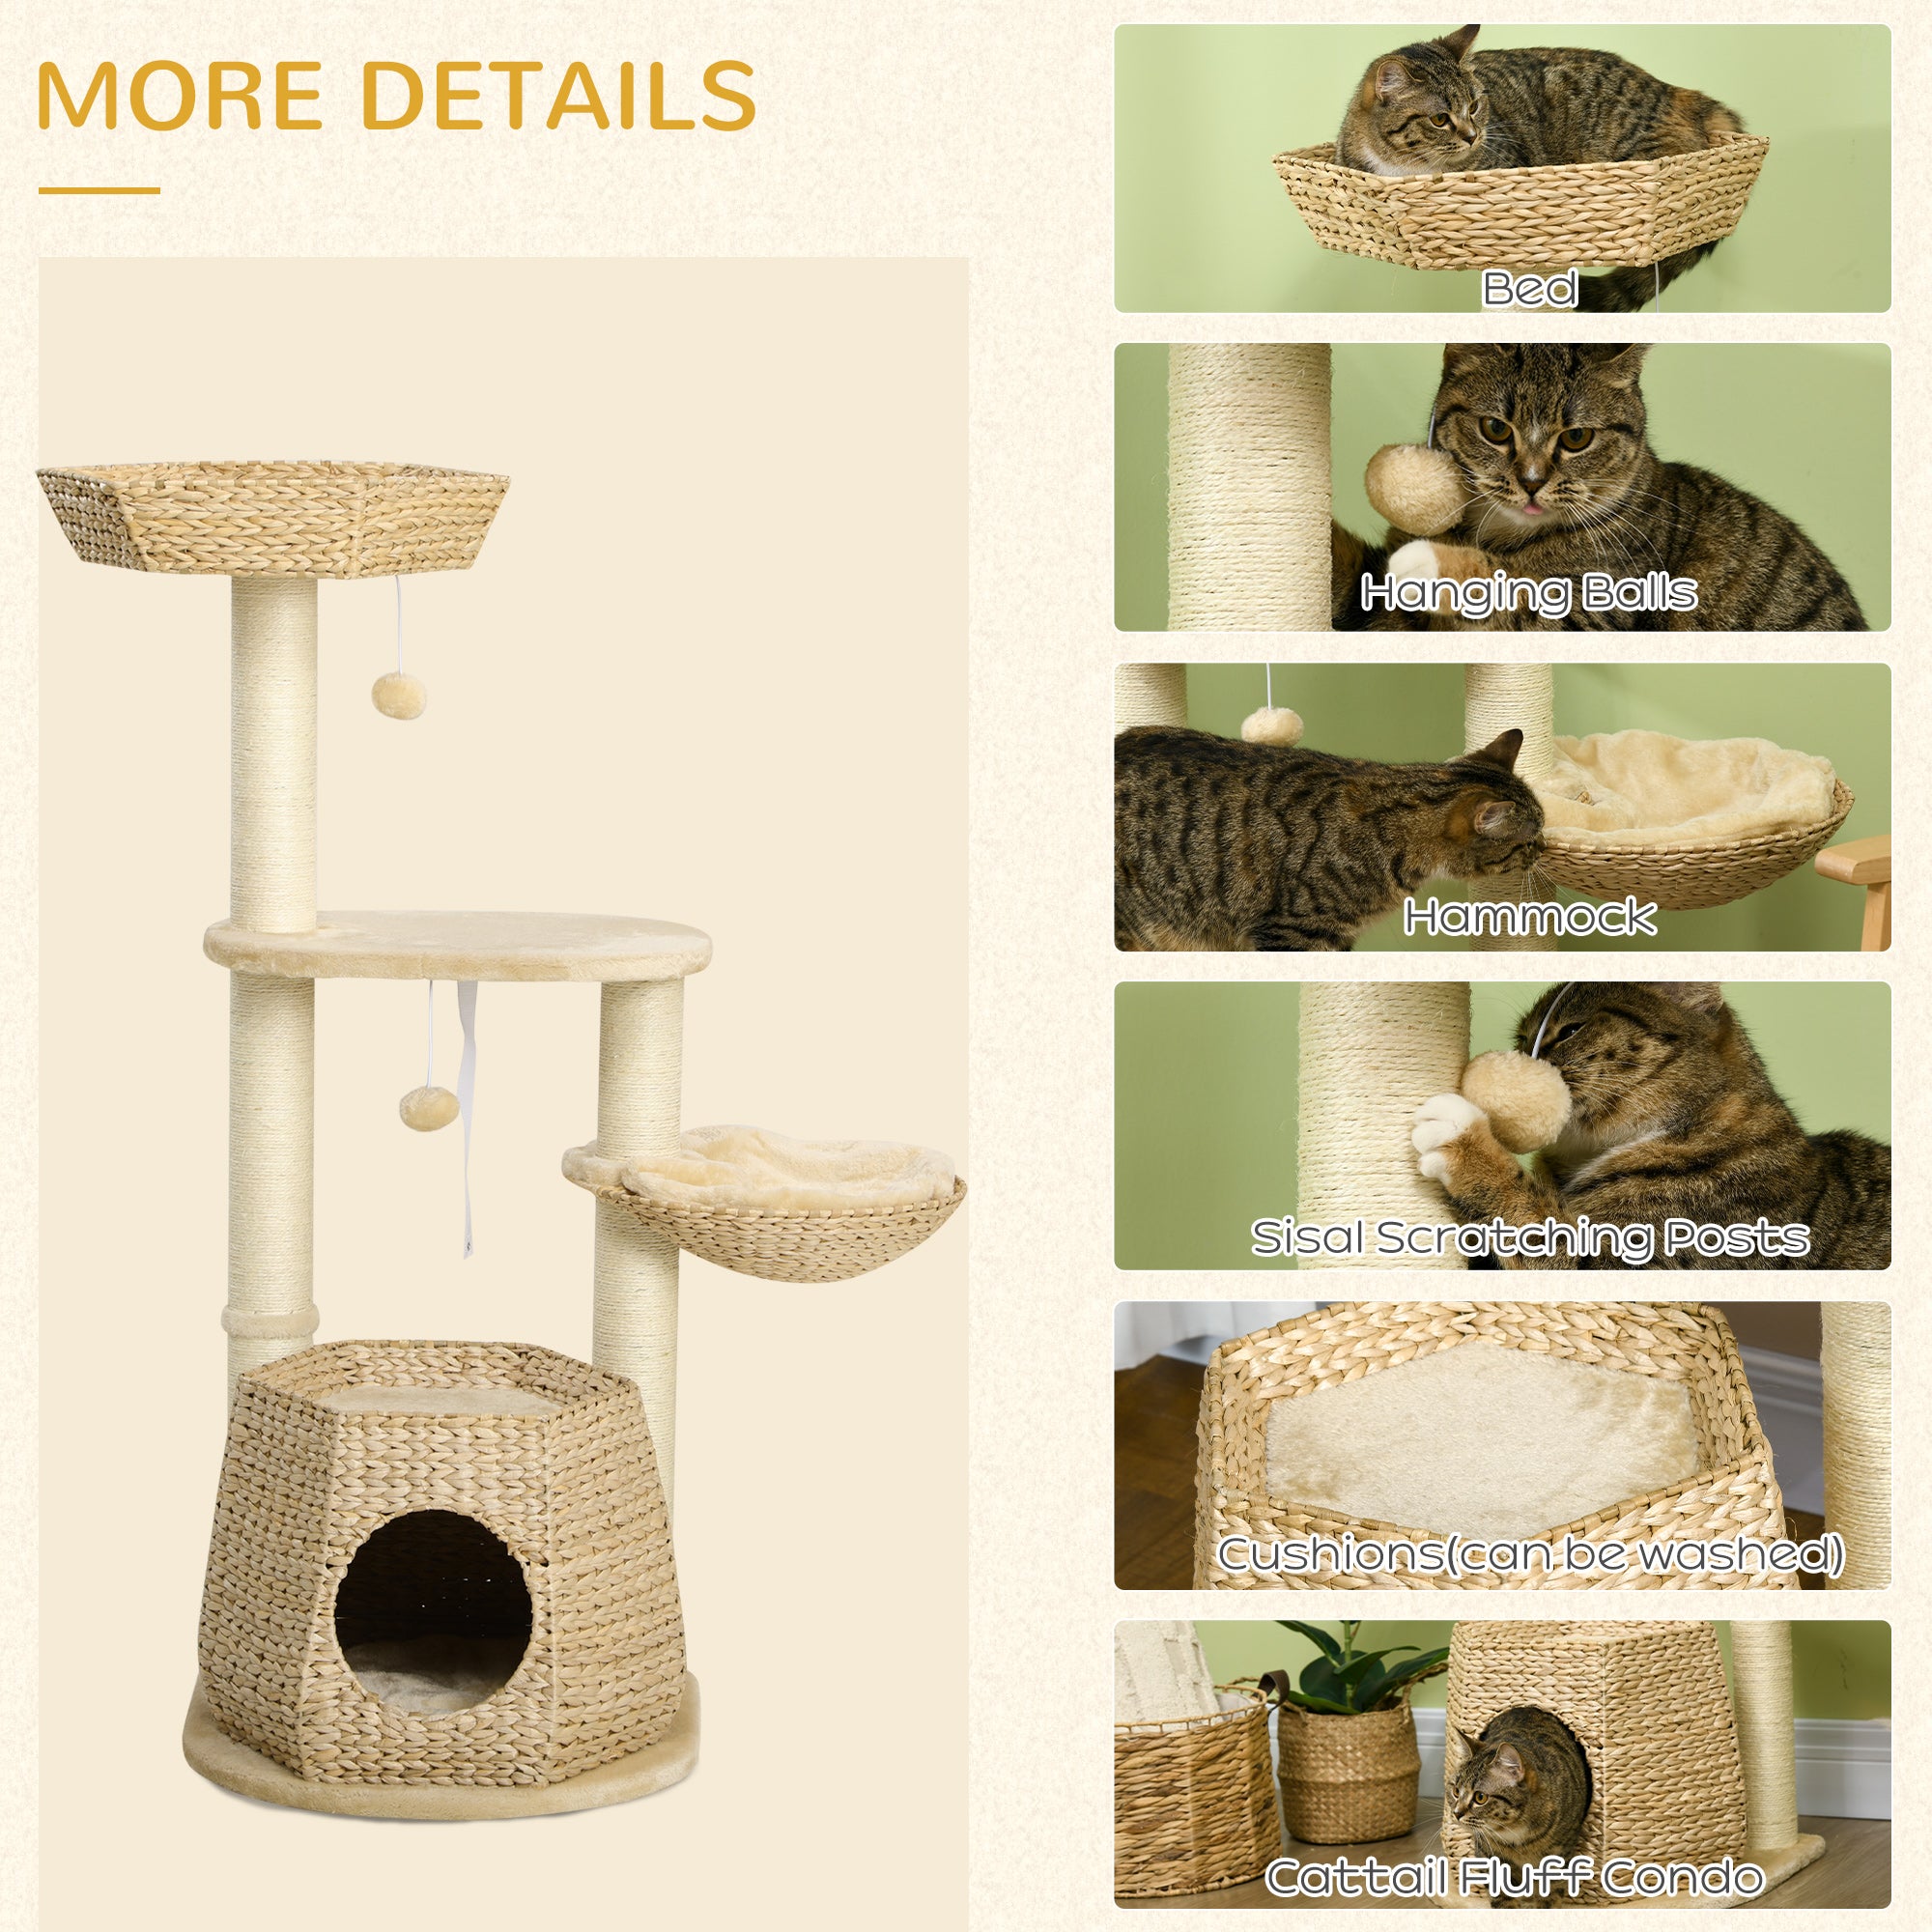 PawHut Cat Tree Tower, Climbing Activity Centre for Kittens with Cattail, Bed, House, Sisal Scratching Post, Hanging Ball, in Natural Tones